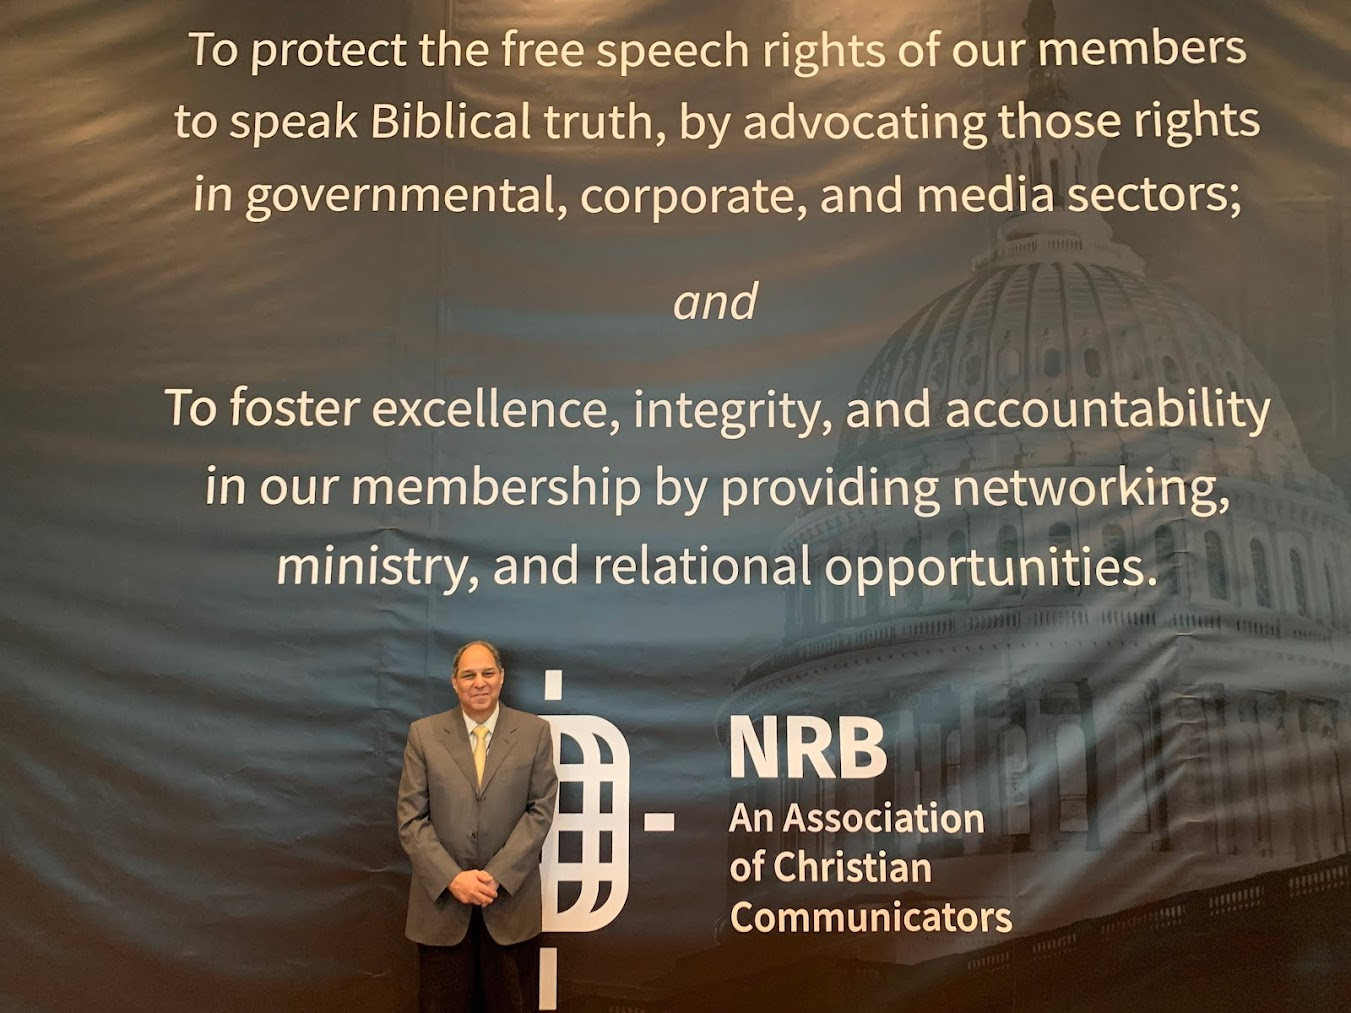 Settlement Project President Attends NRB, Christian Media Convention